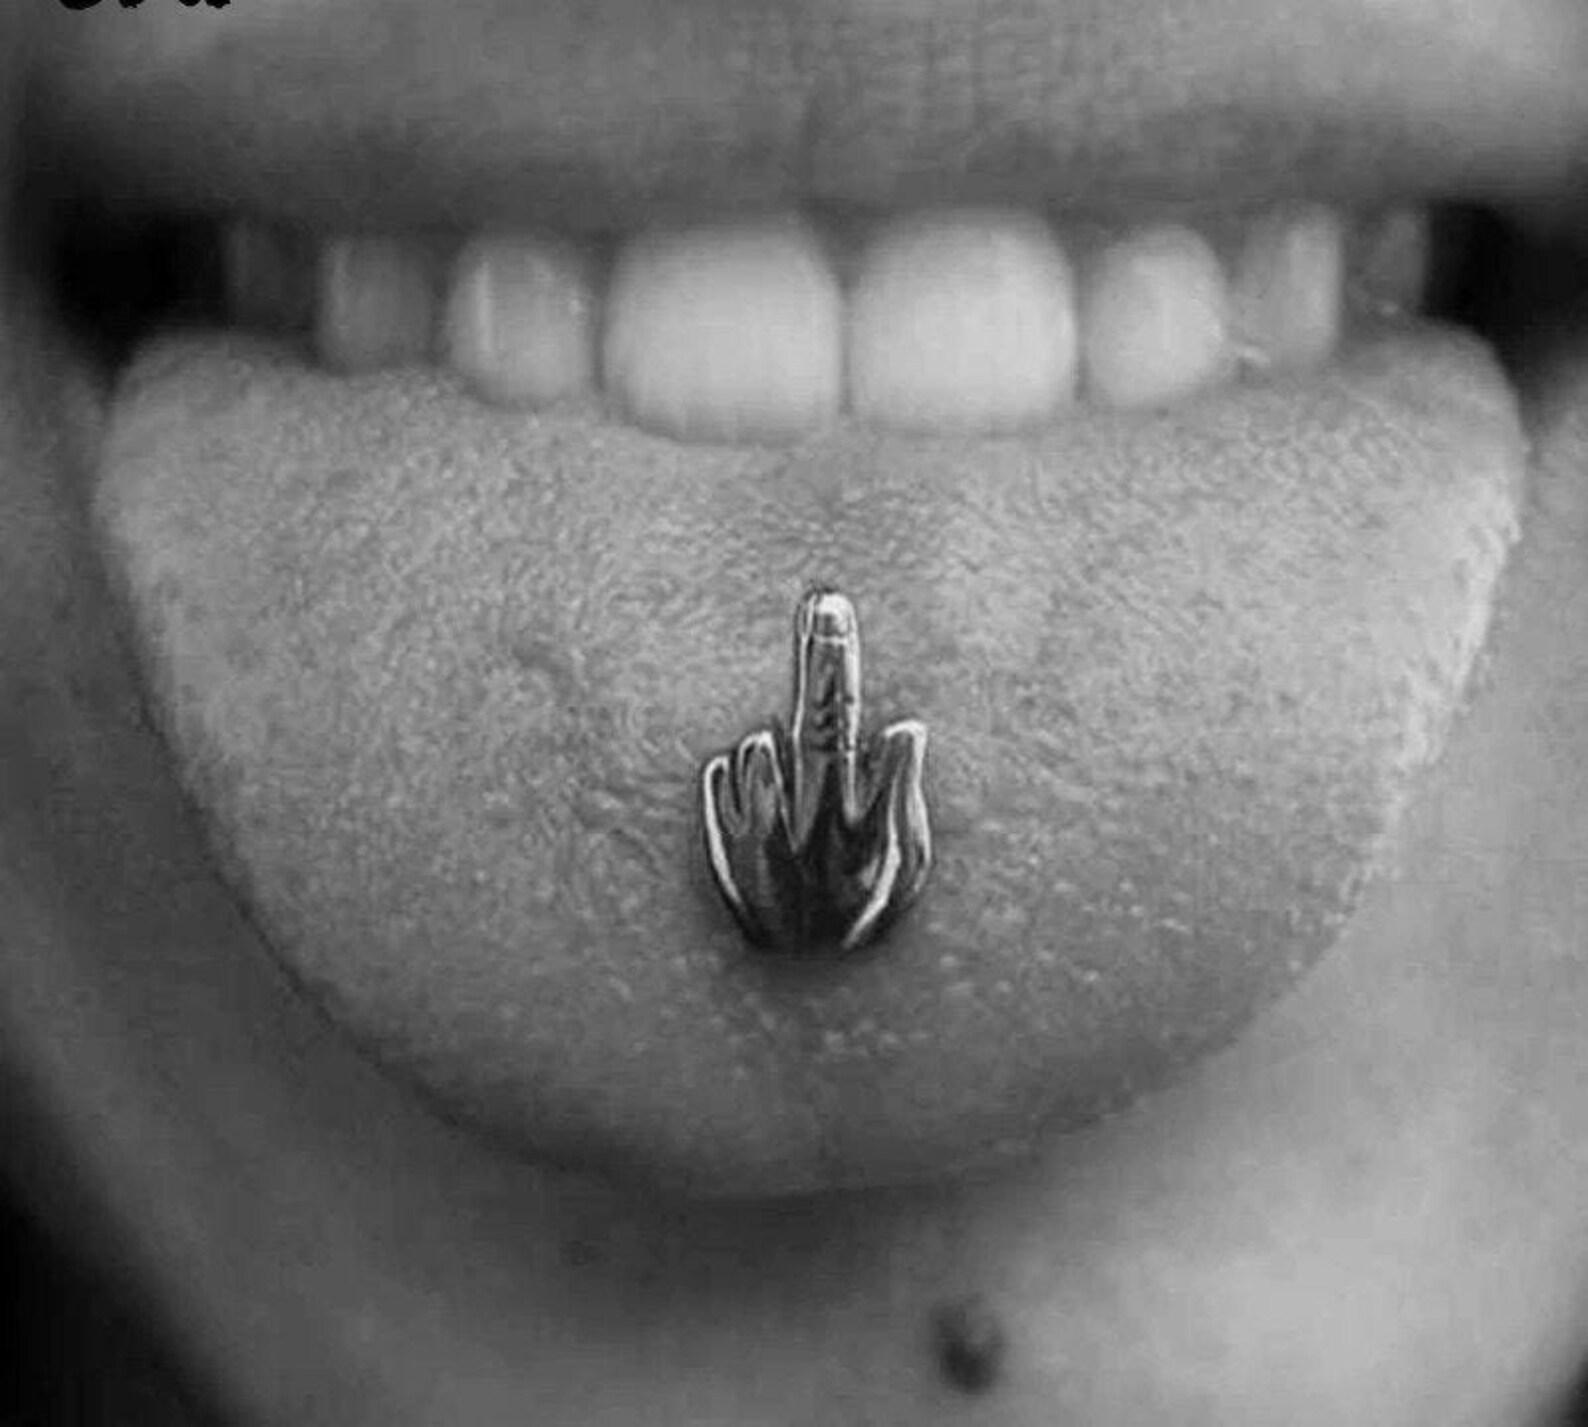 Tongue ring pictures